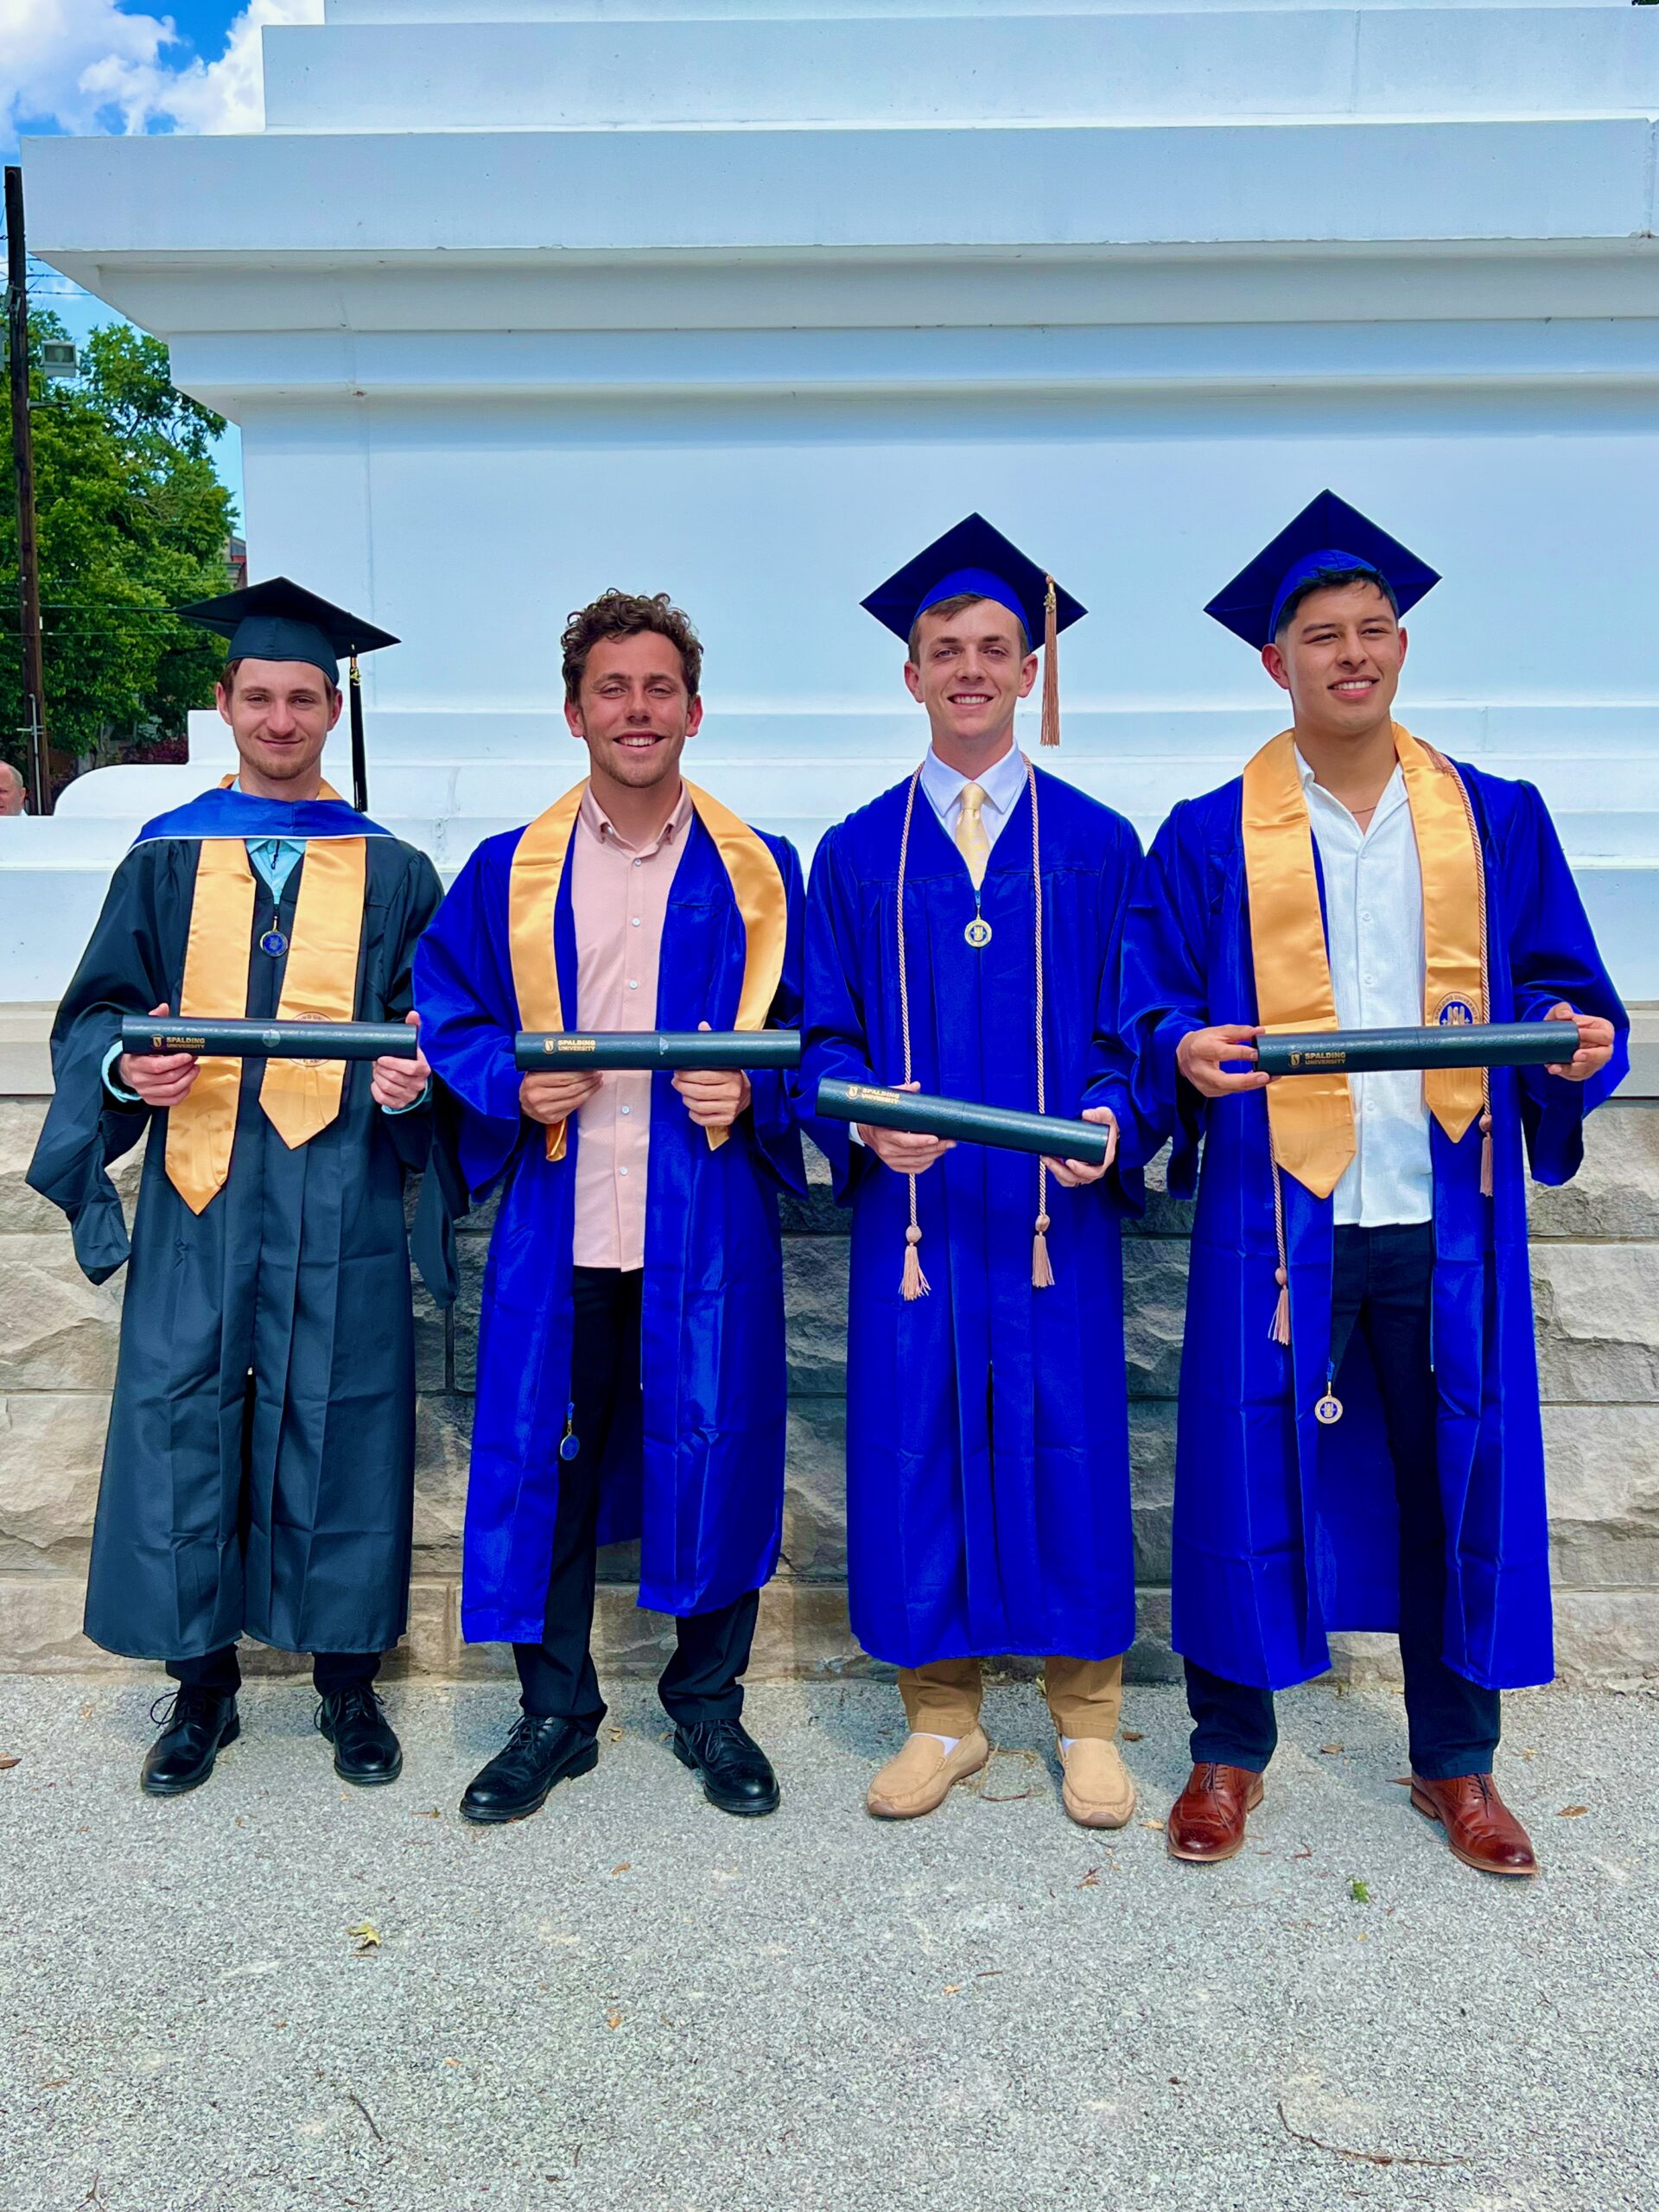 Four Spalding graduates, three bachelor's and one master's, posing with their degree tubes outside